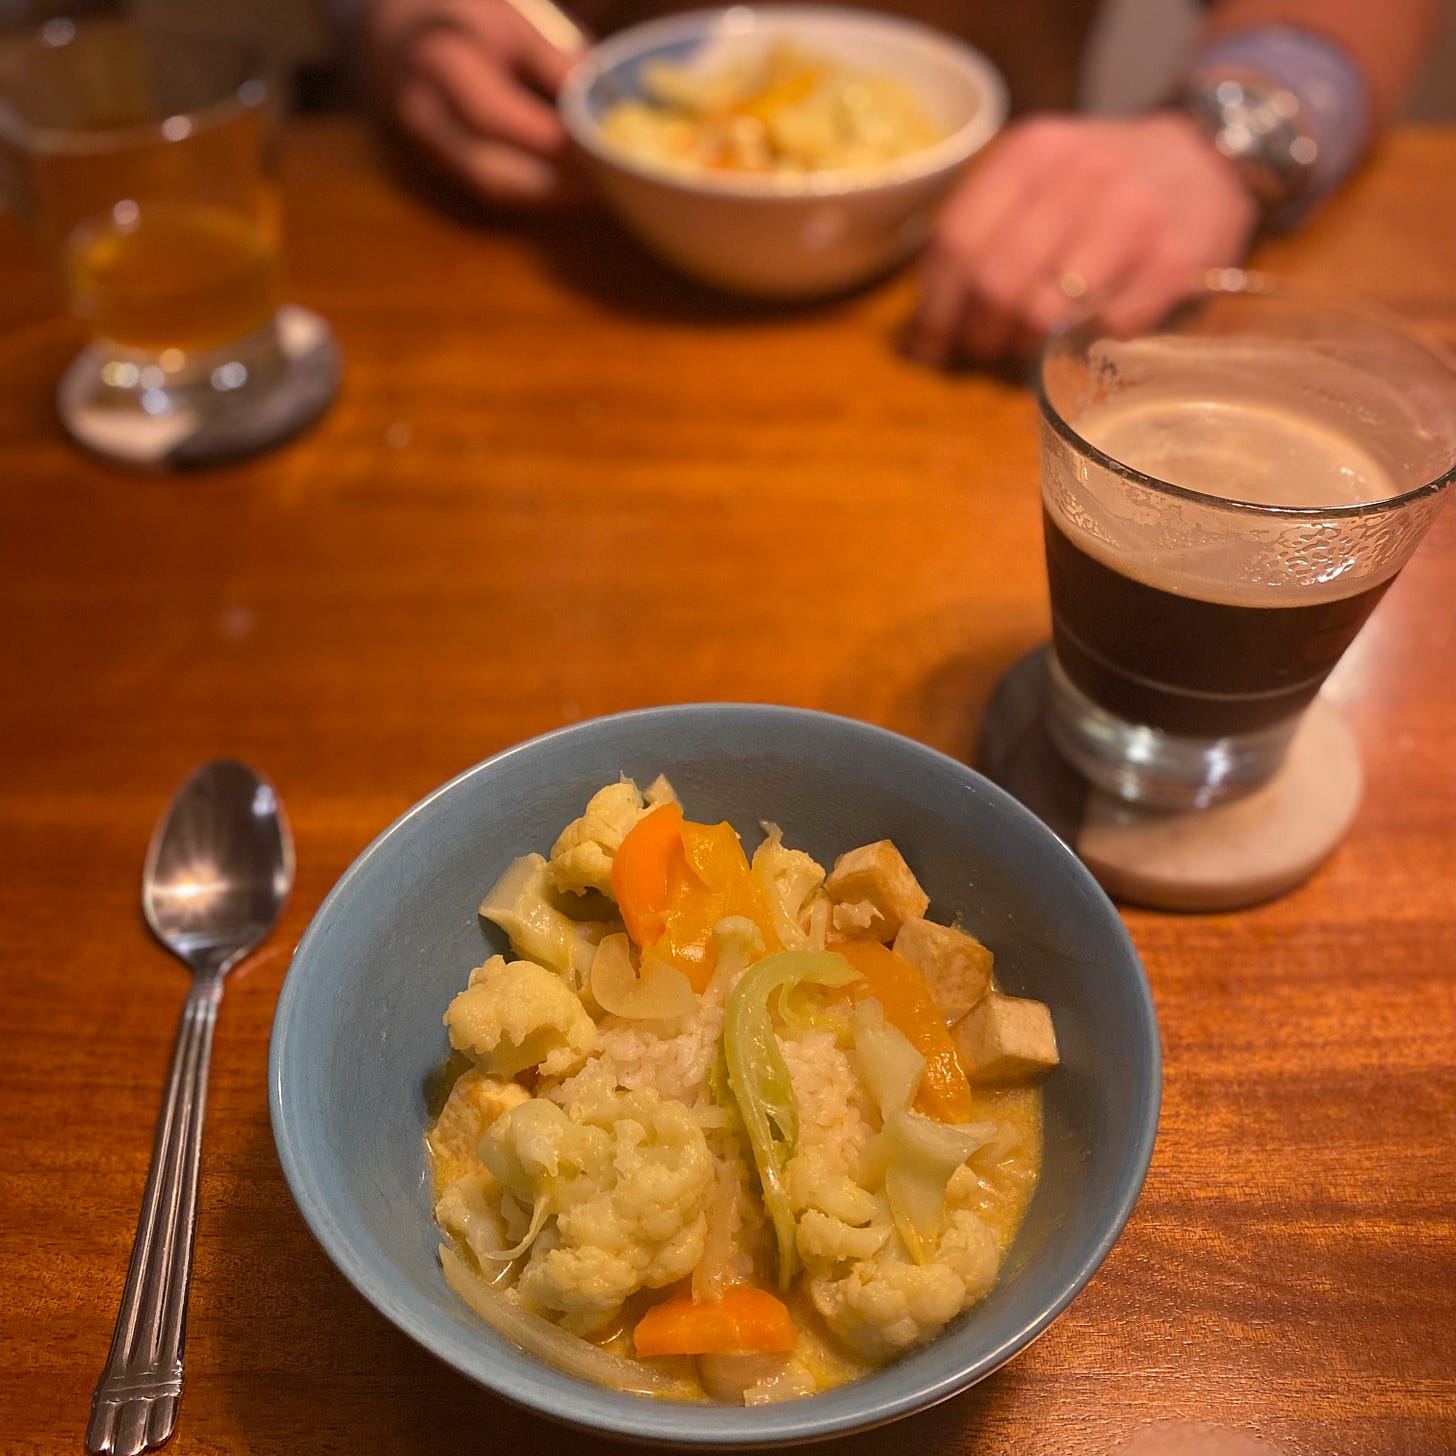 A blue bowl of yellow curry with cauliflower, carrots, and cubes of tofu. Next to it on a coaster is a glass of dark beer. Jeff is across the table with a white bowl of the same, and a glass of lighter beer.